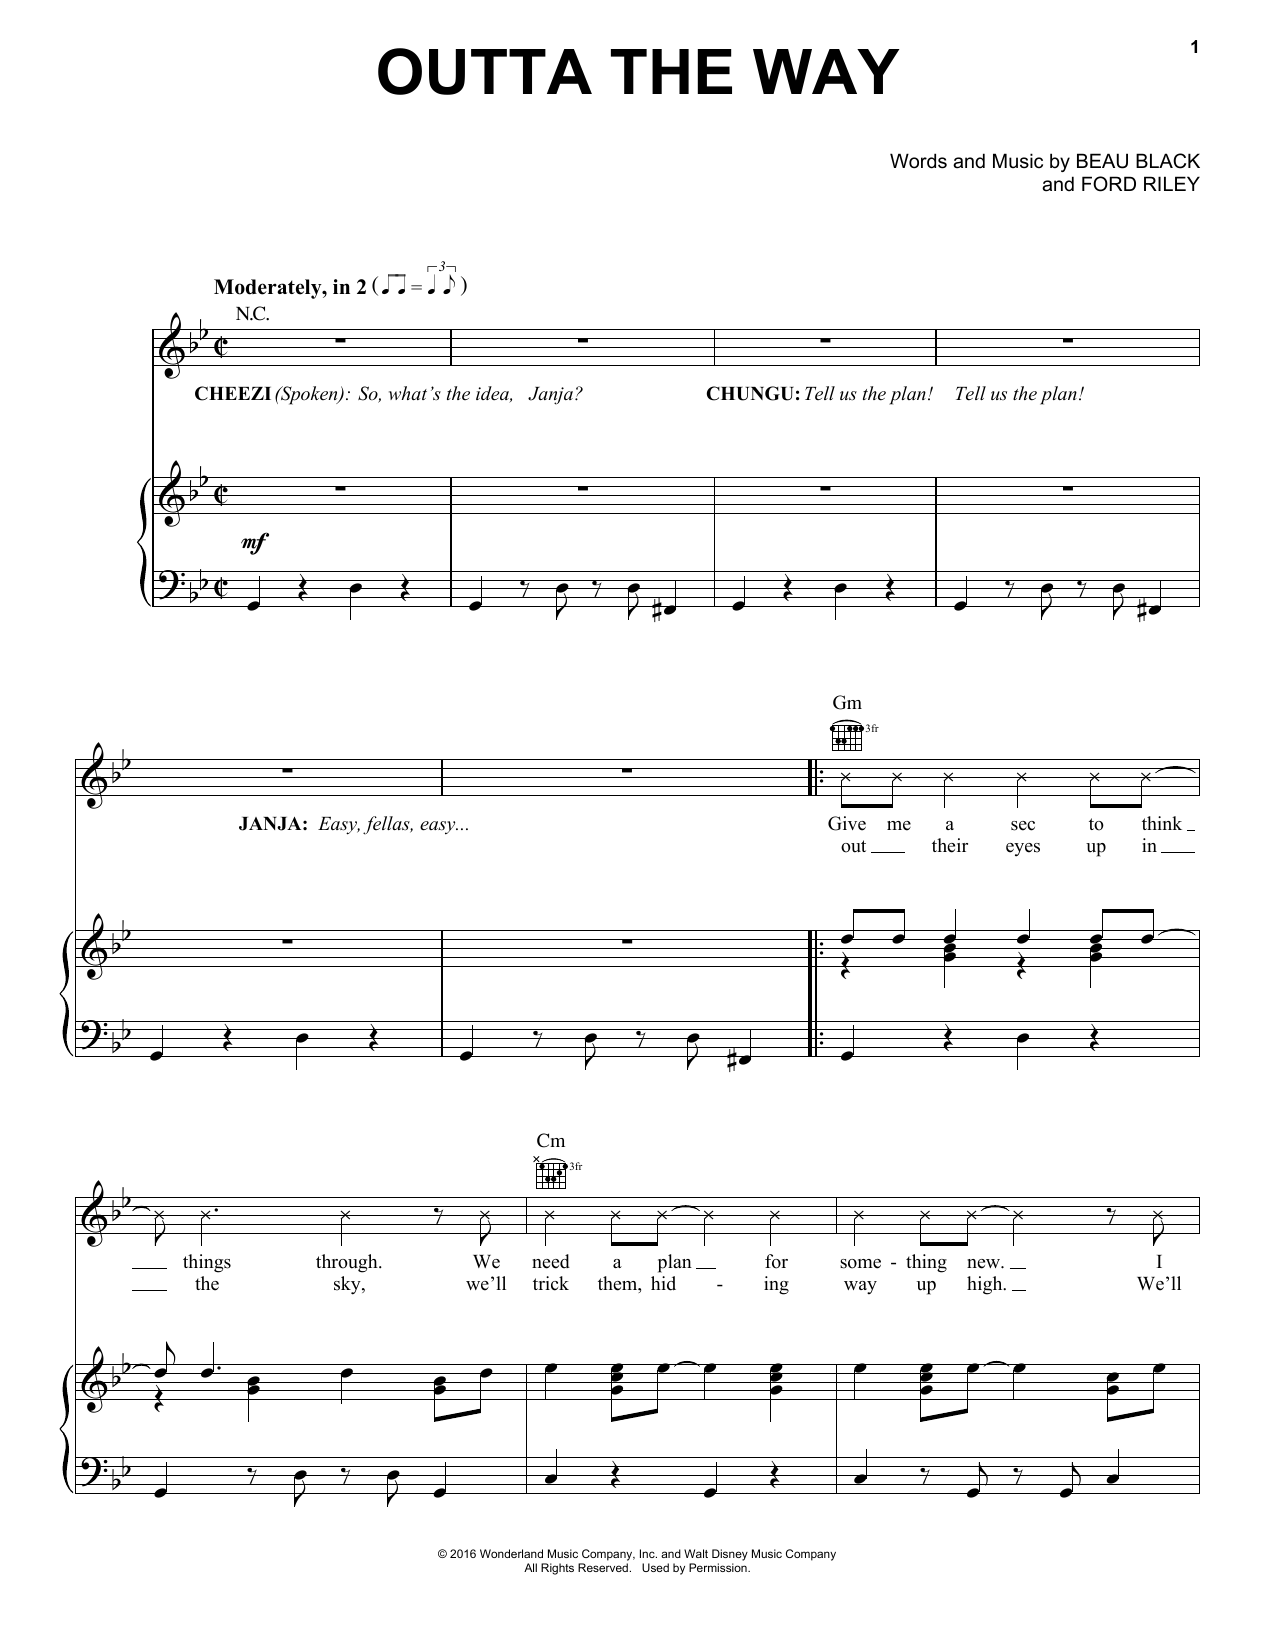 Download Beau Black Outta The Way Sheet Music